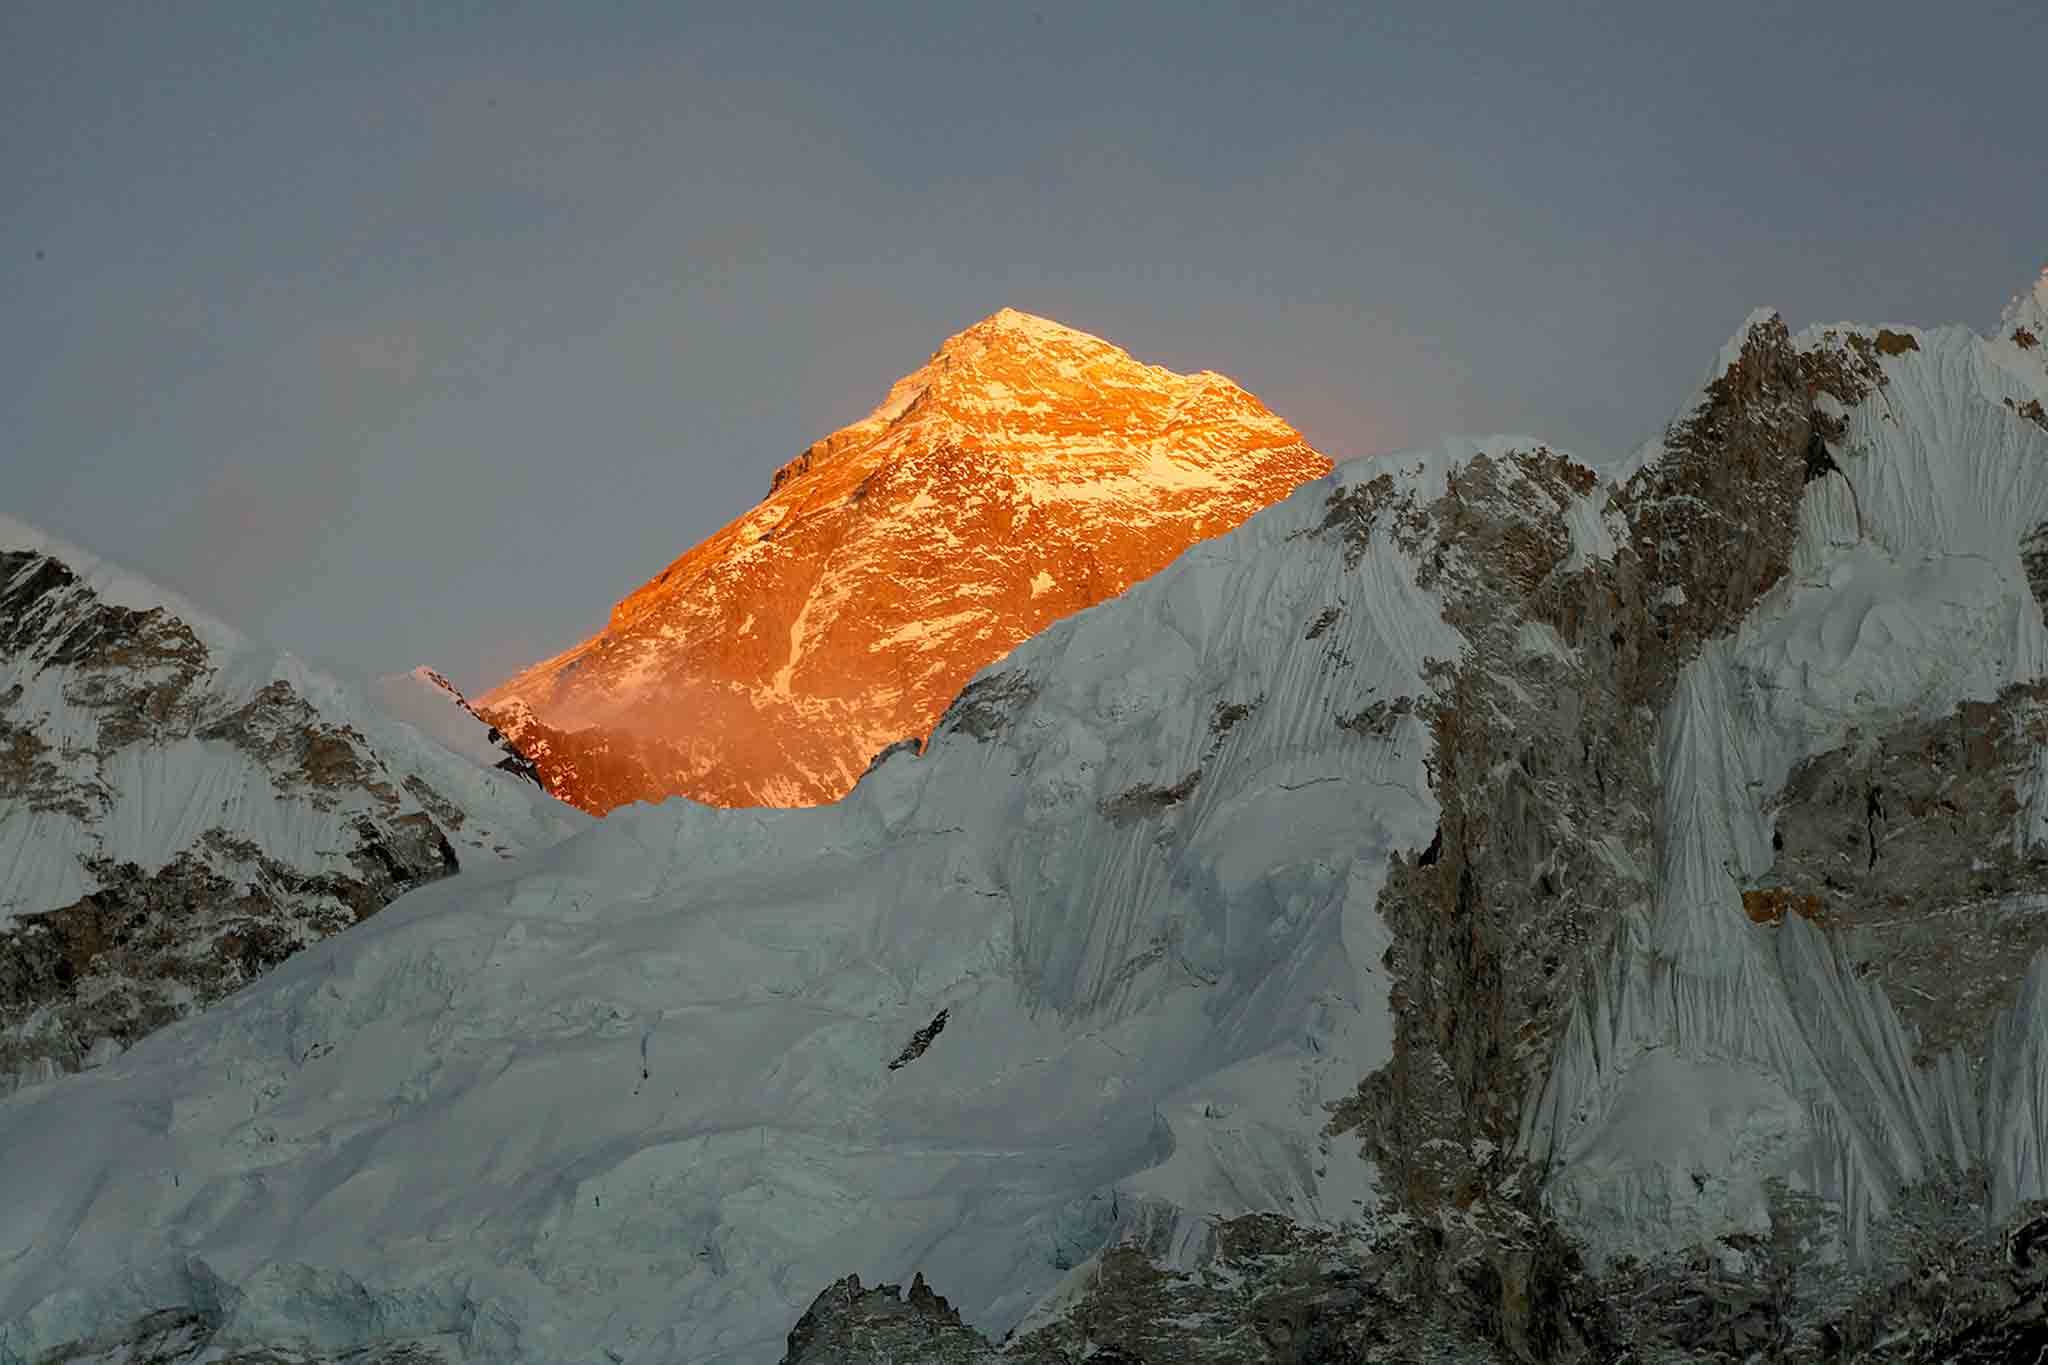 Mount Everest, as seen from the way to Kalapatthar in Nepal in 2015. (AP Photo/Tashi Sherpa, File)